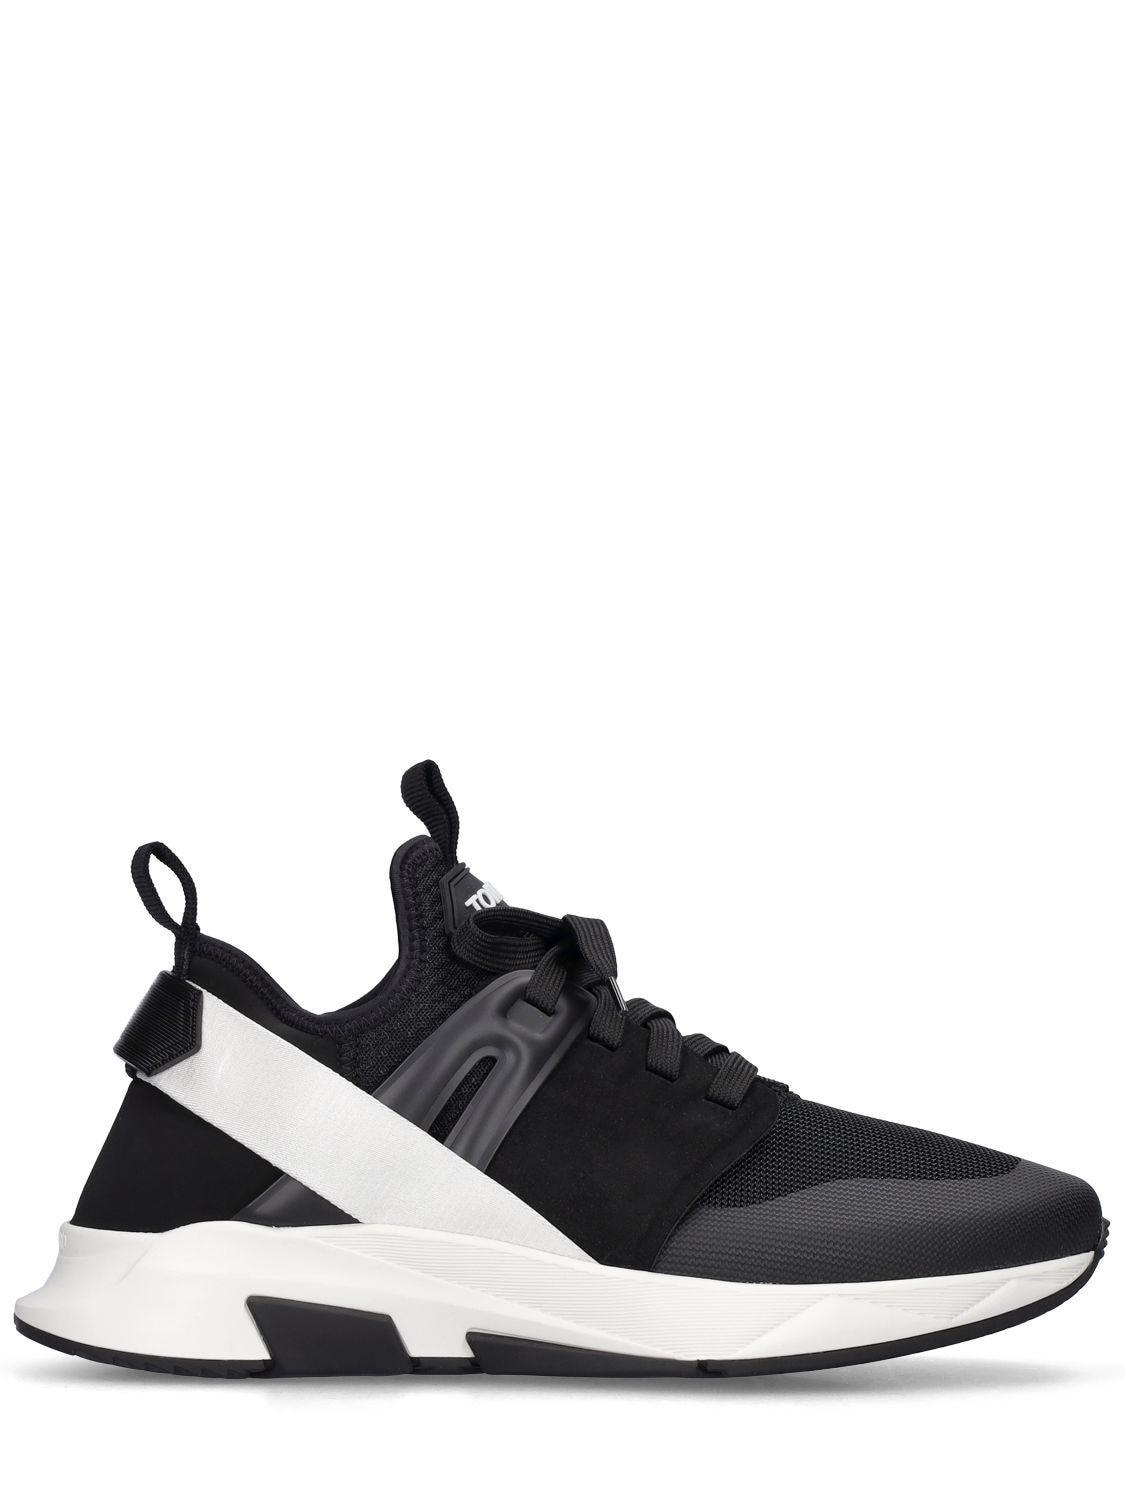 Tom Ford Alcantara Tech & Leather Low Sneakers in Black for Men | Lyst